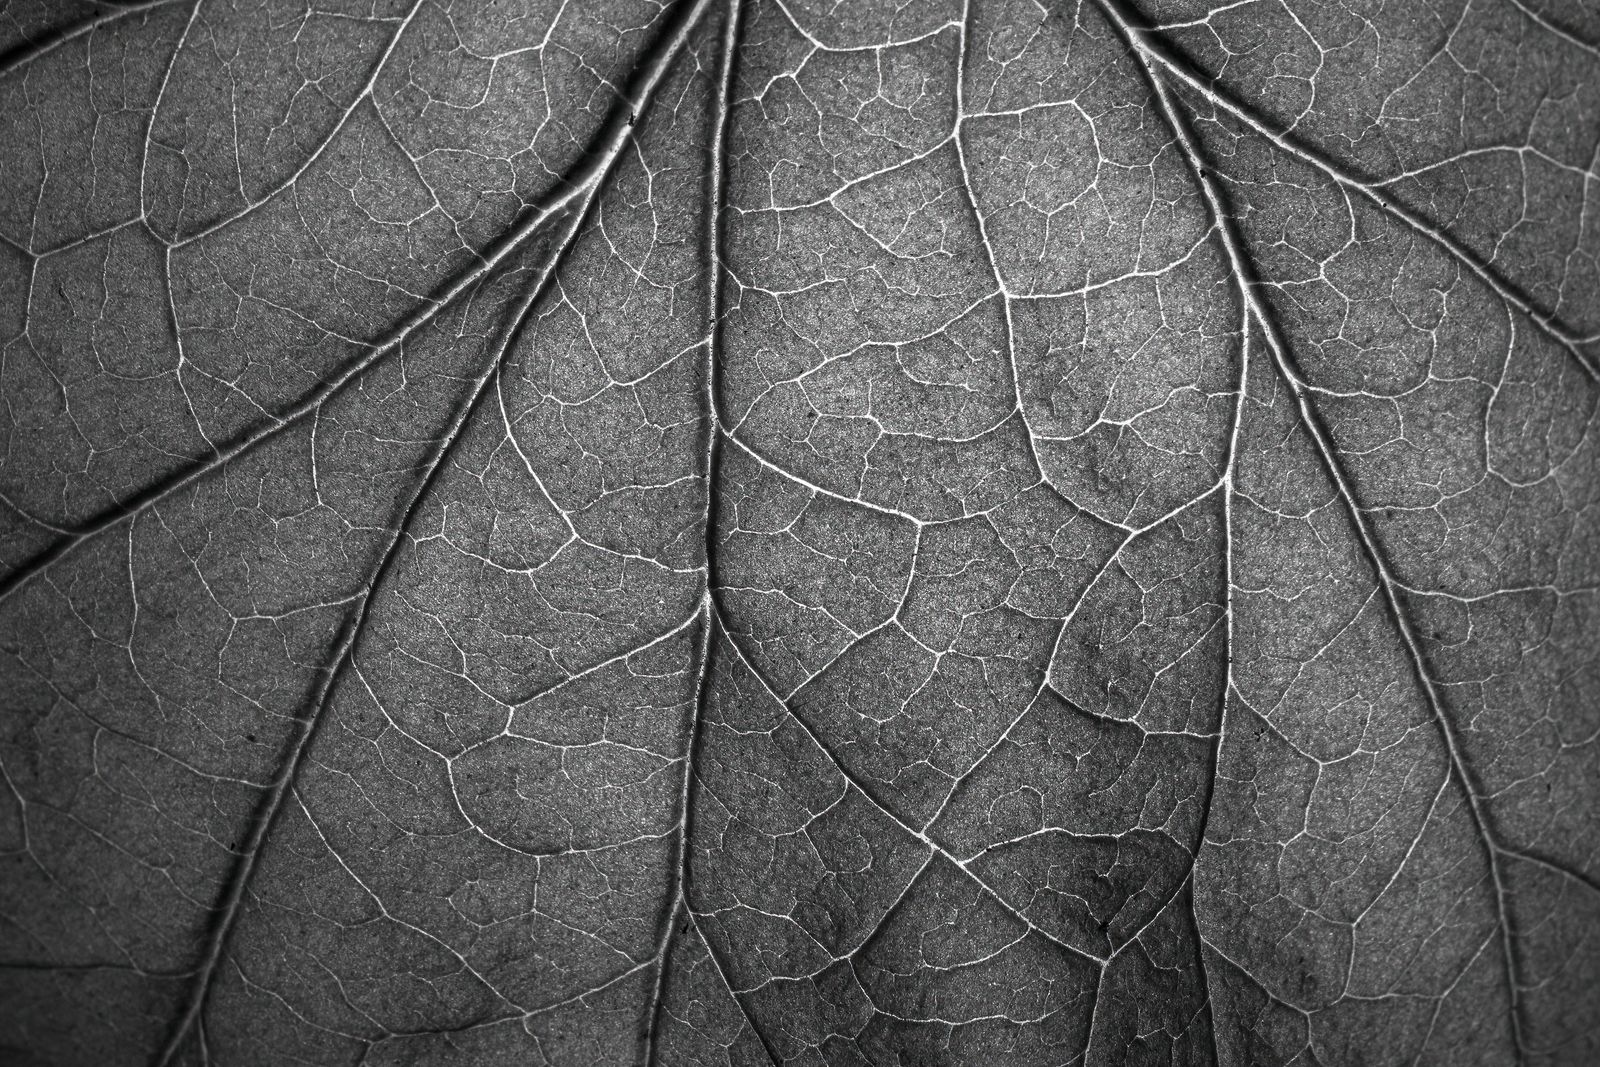 © Galapagensis - Image from the Veins, Neurons and Shadows photography project